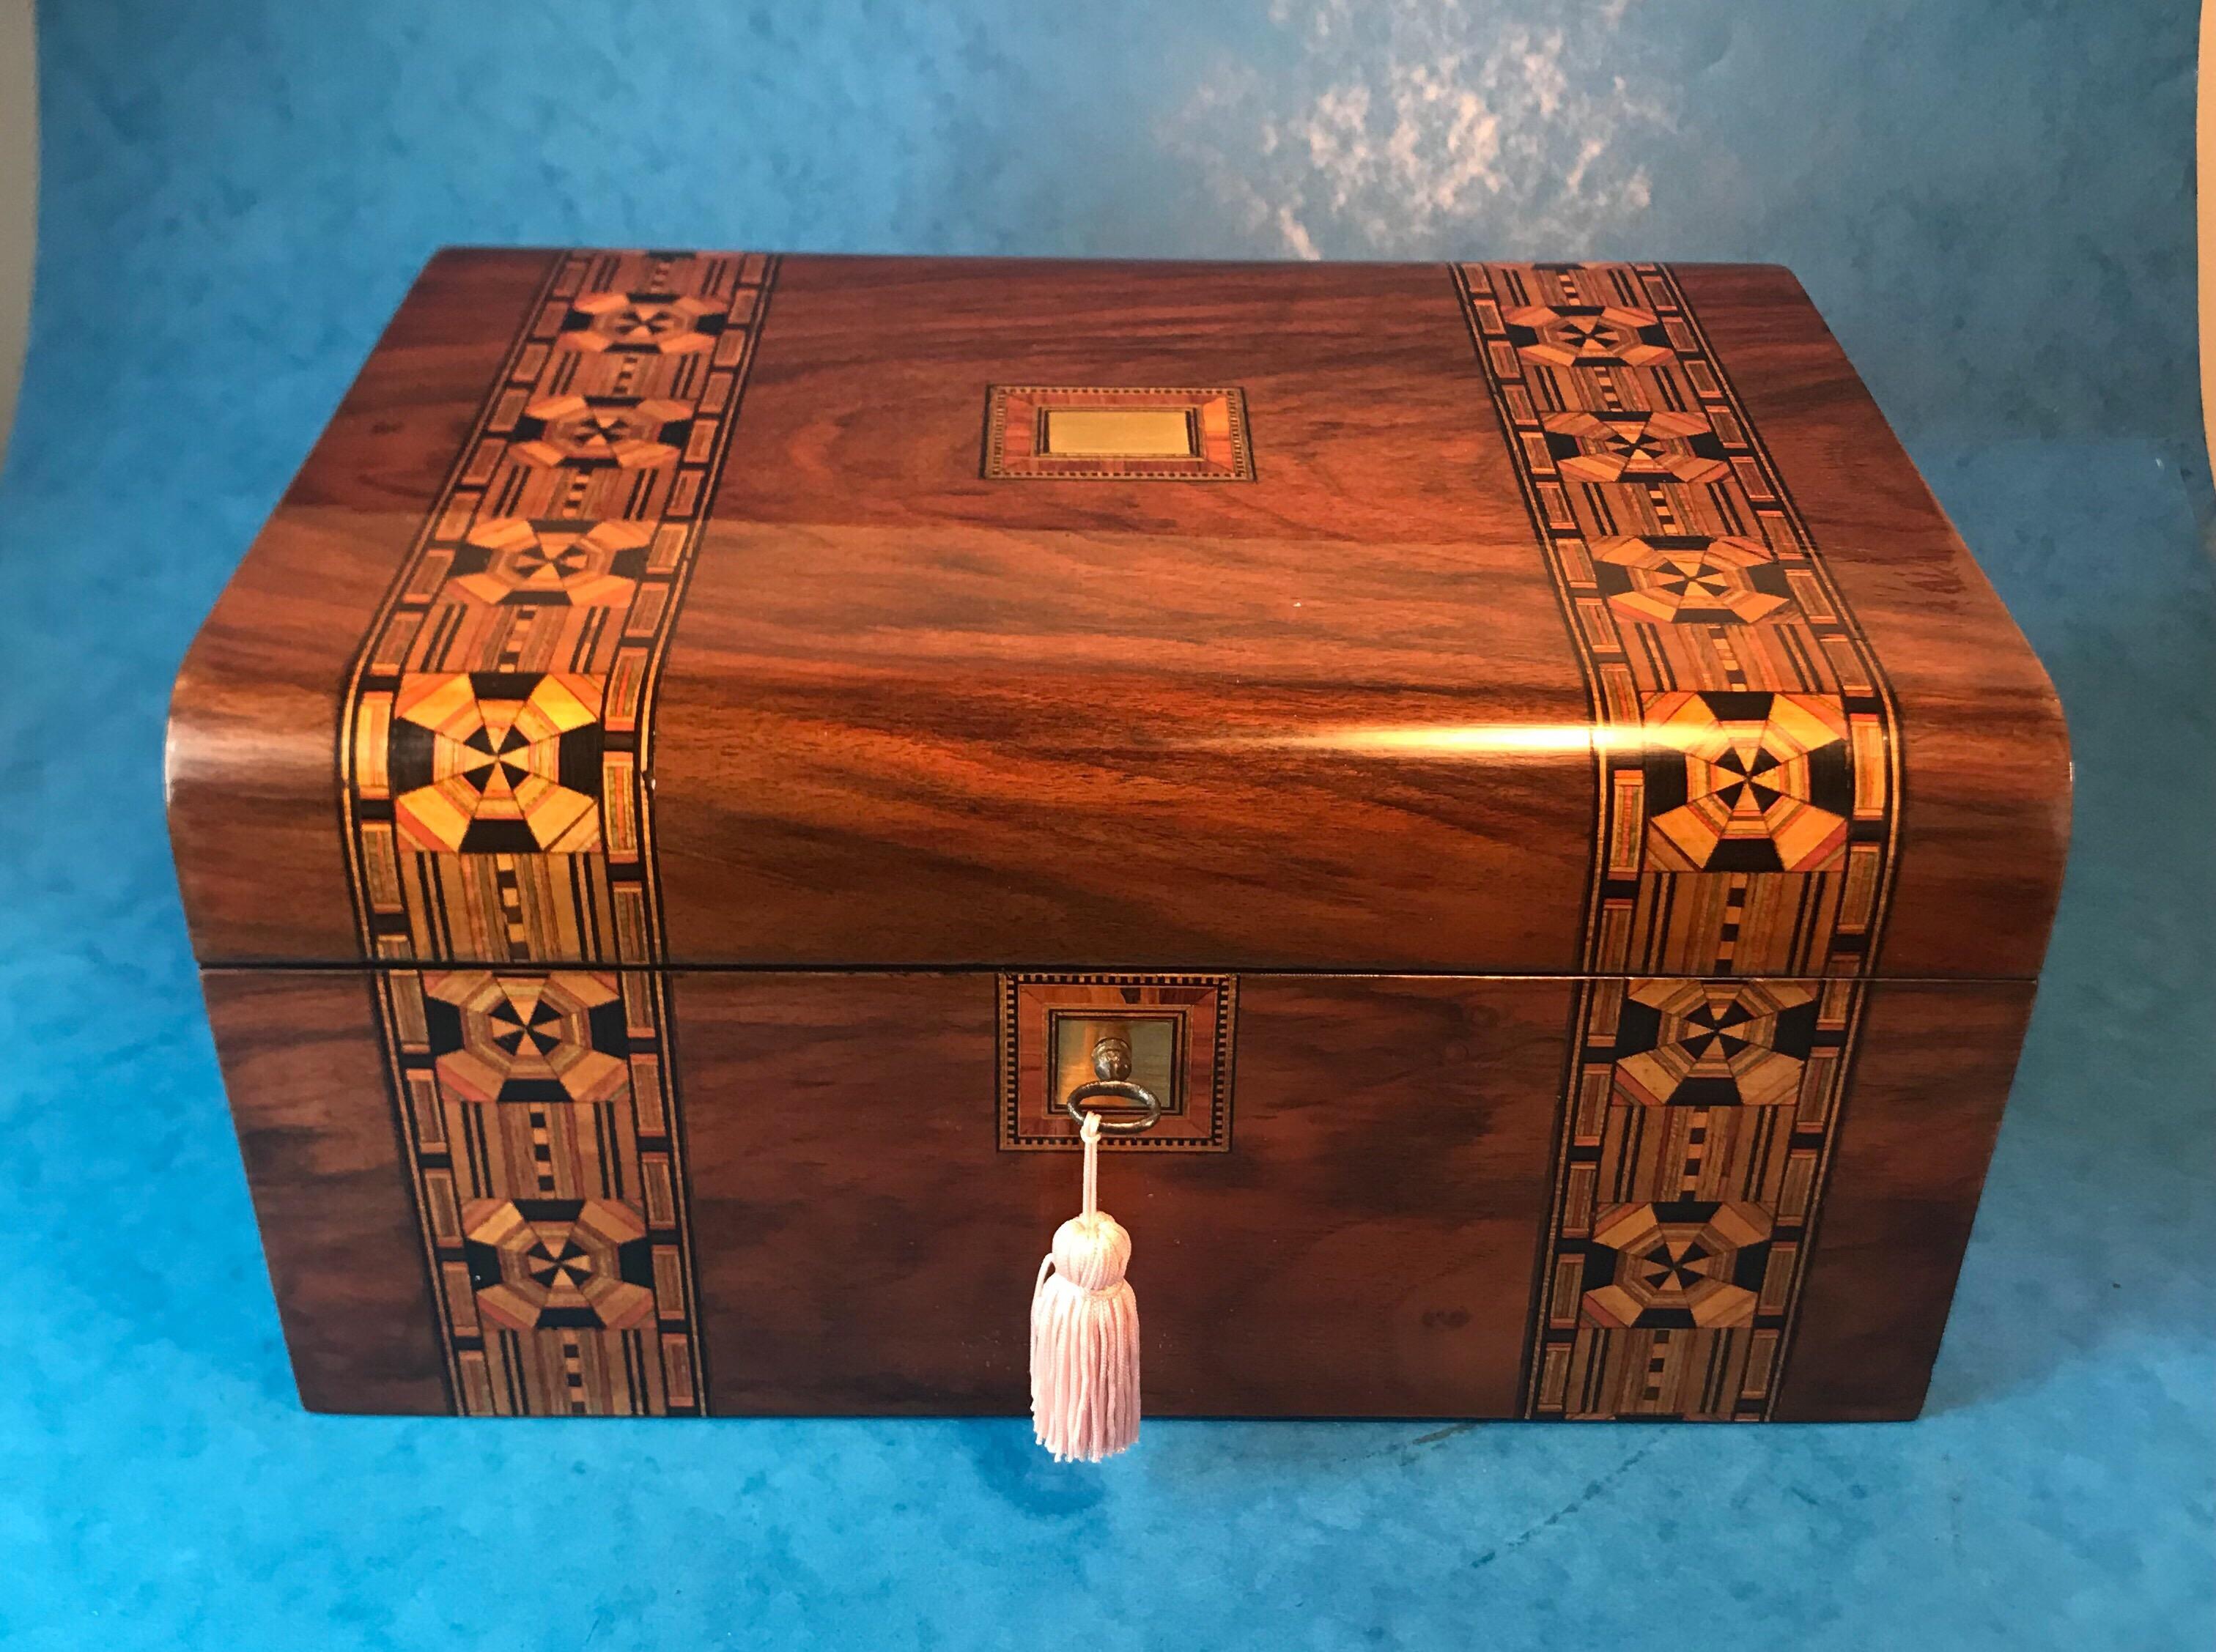 Antique walnut 1880 jewelry box. The jewelry box is banded with inlaid Tunbridge ware, it has a brass top and key escutcheon and a fully working lock and key. The jewellery box interior has its original tray that’s been partly relined with